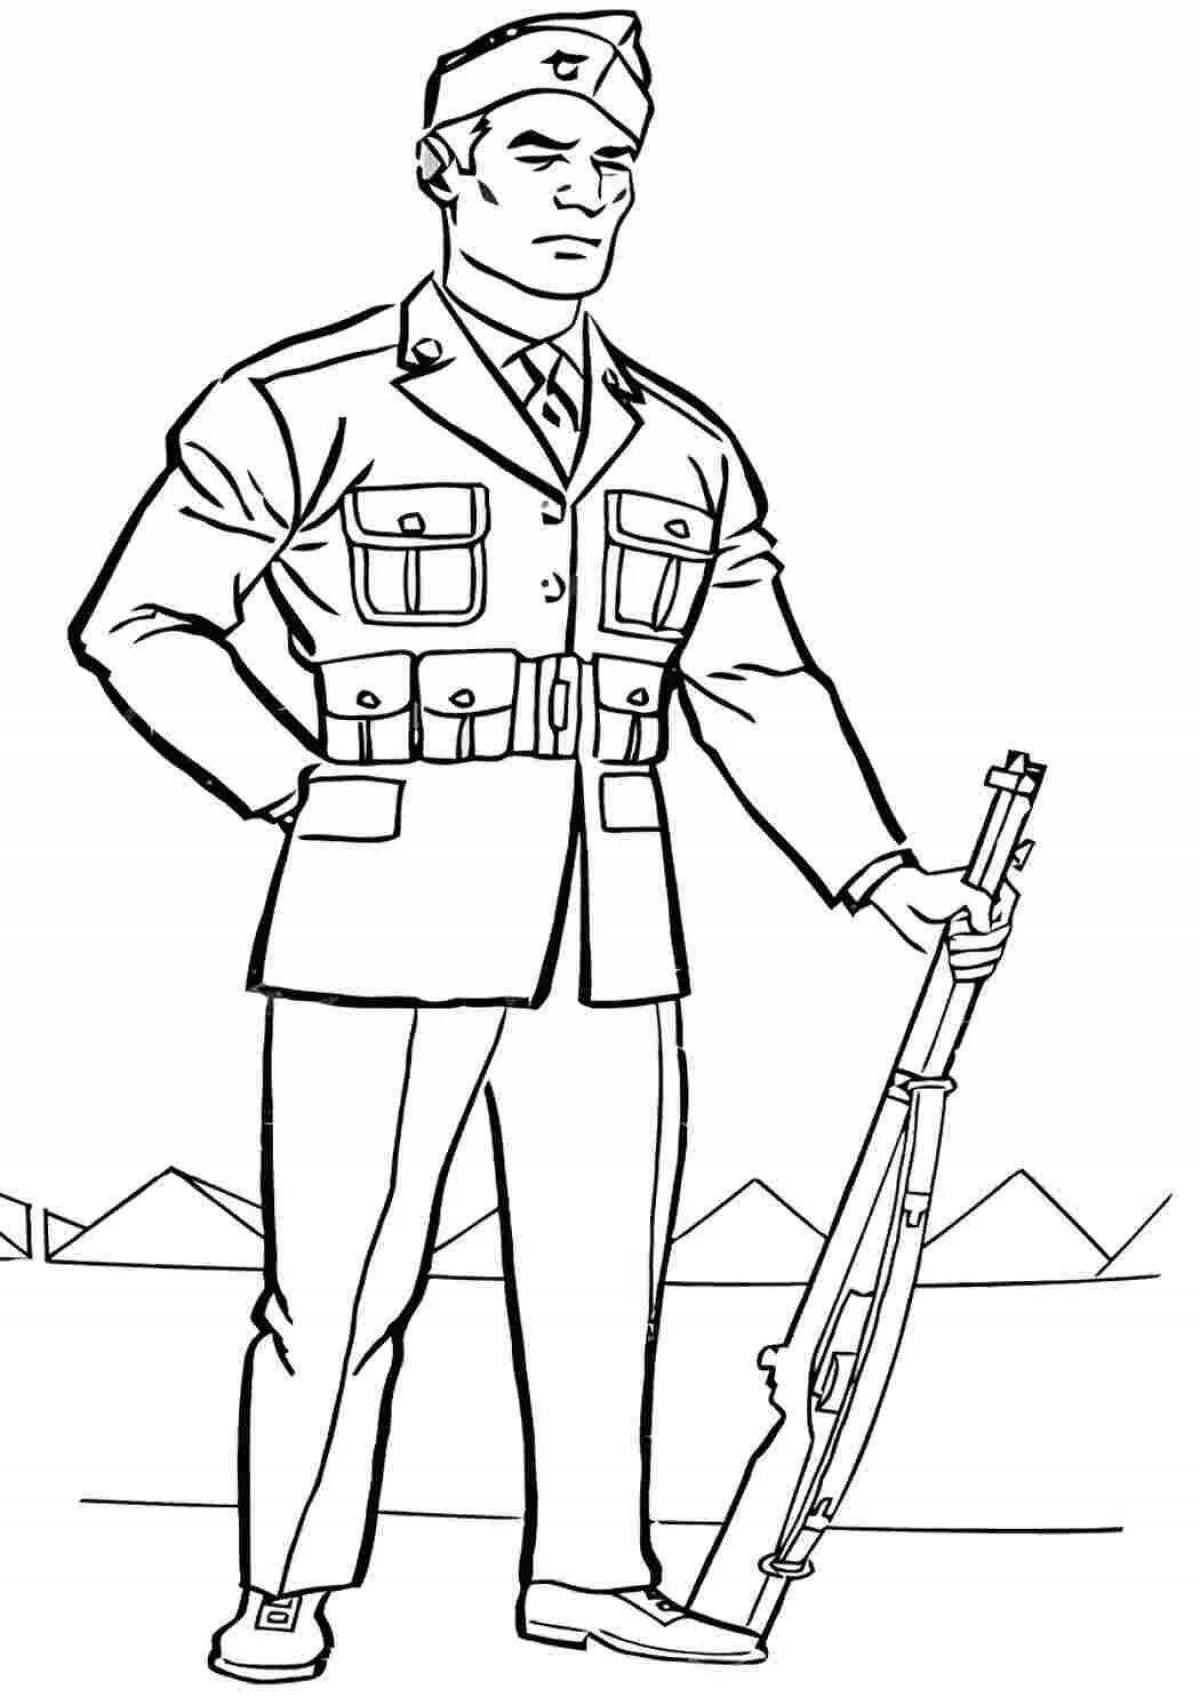 Great military lungs coloring book